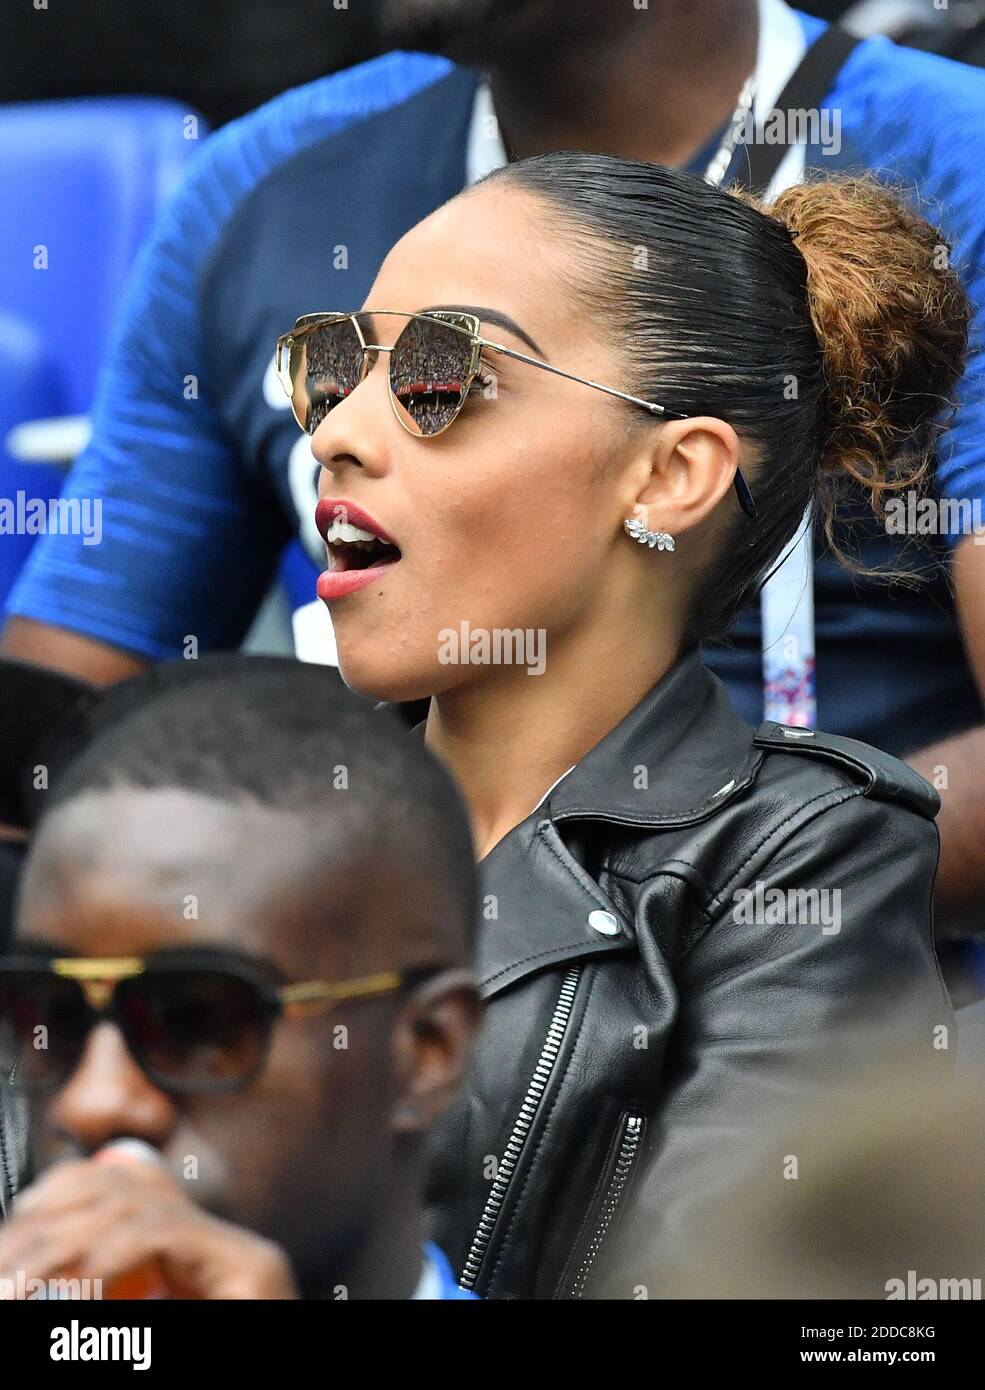 Marine Tolisso sister of Corentin Tolisso during the FIFA World Cup 2018 Round of 8 match at the Nizhny Novgorod Stadium Russia, on July 6, 2018. . Photo by Christian Liewig/ABACAPRESS.COM Stock Photo